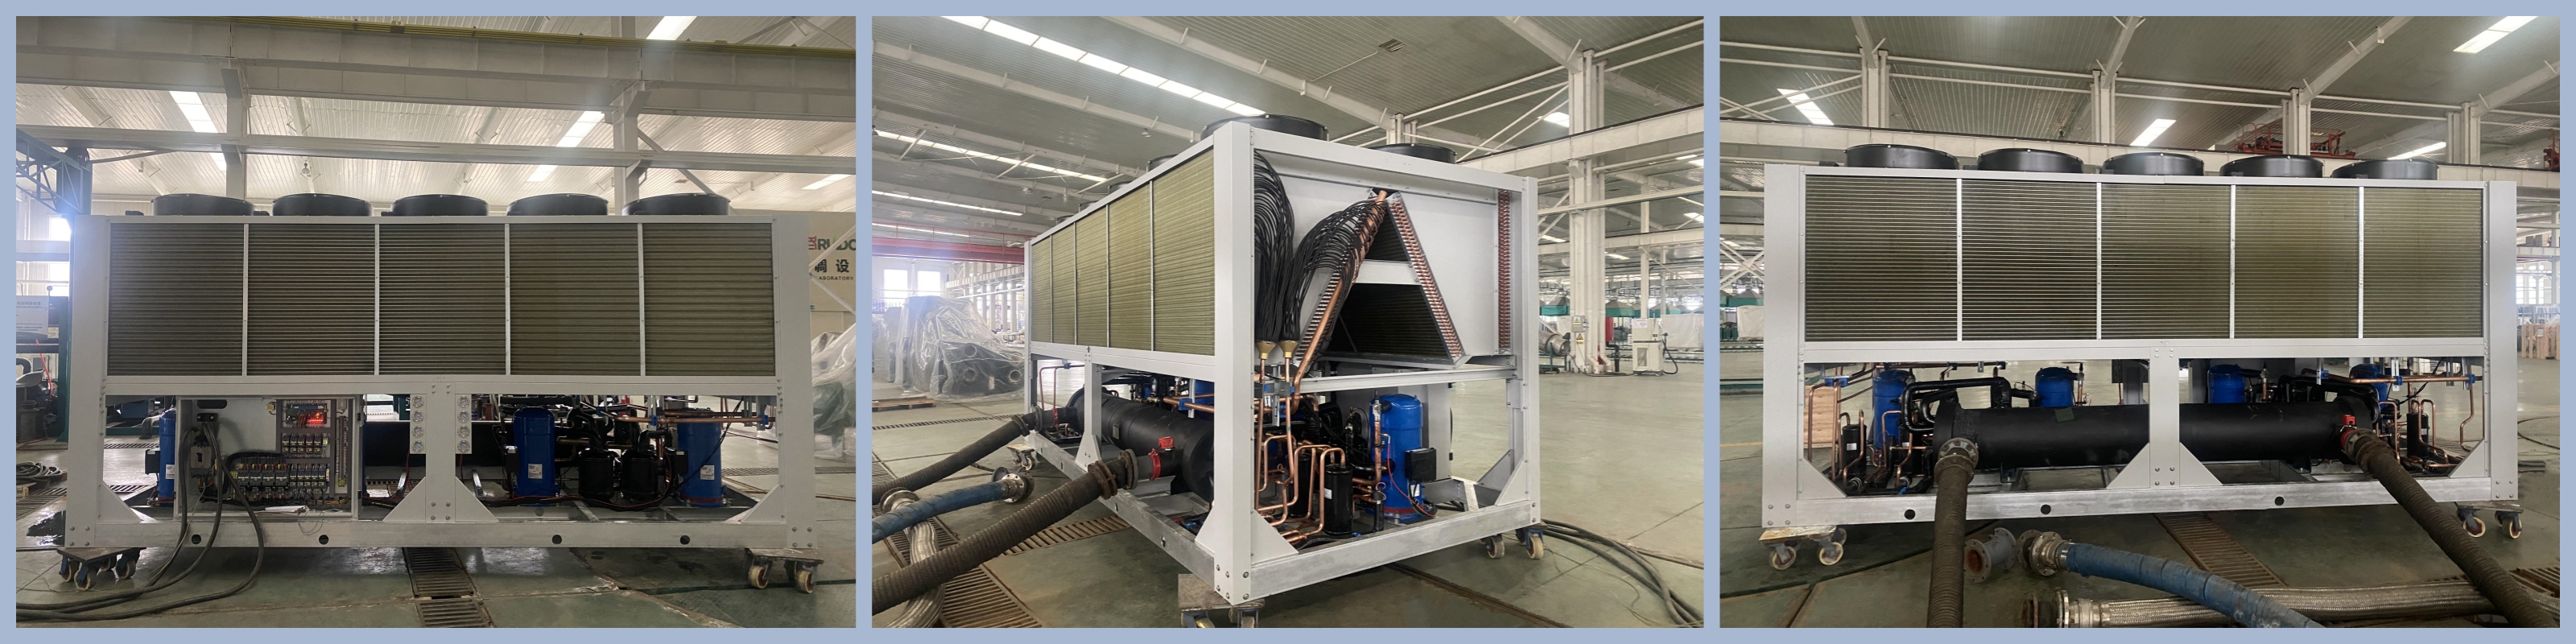 4-Air-cooled scroll chiller under test